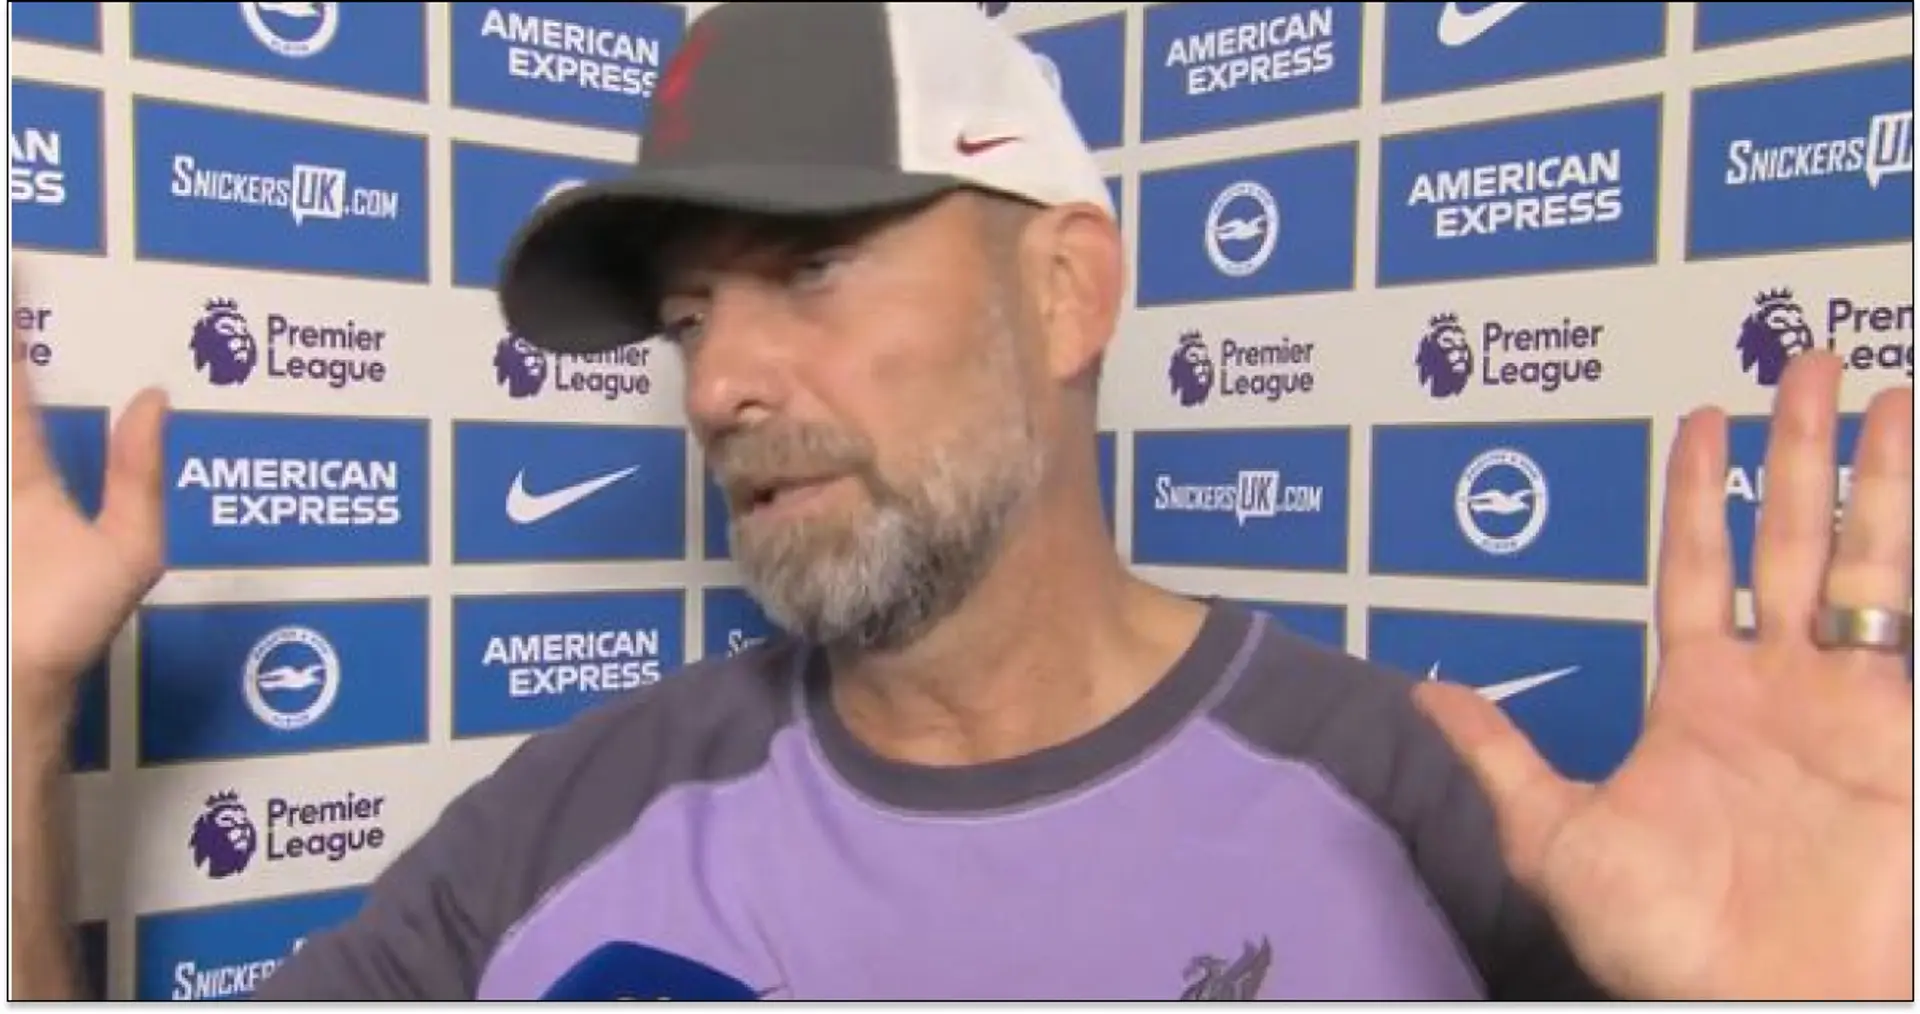 'We wanted to do high pressing': Klopp says Amex 'big pitch' caused Liverpool problems v Brighton